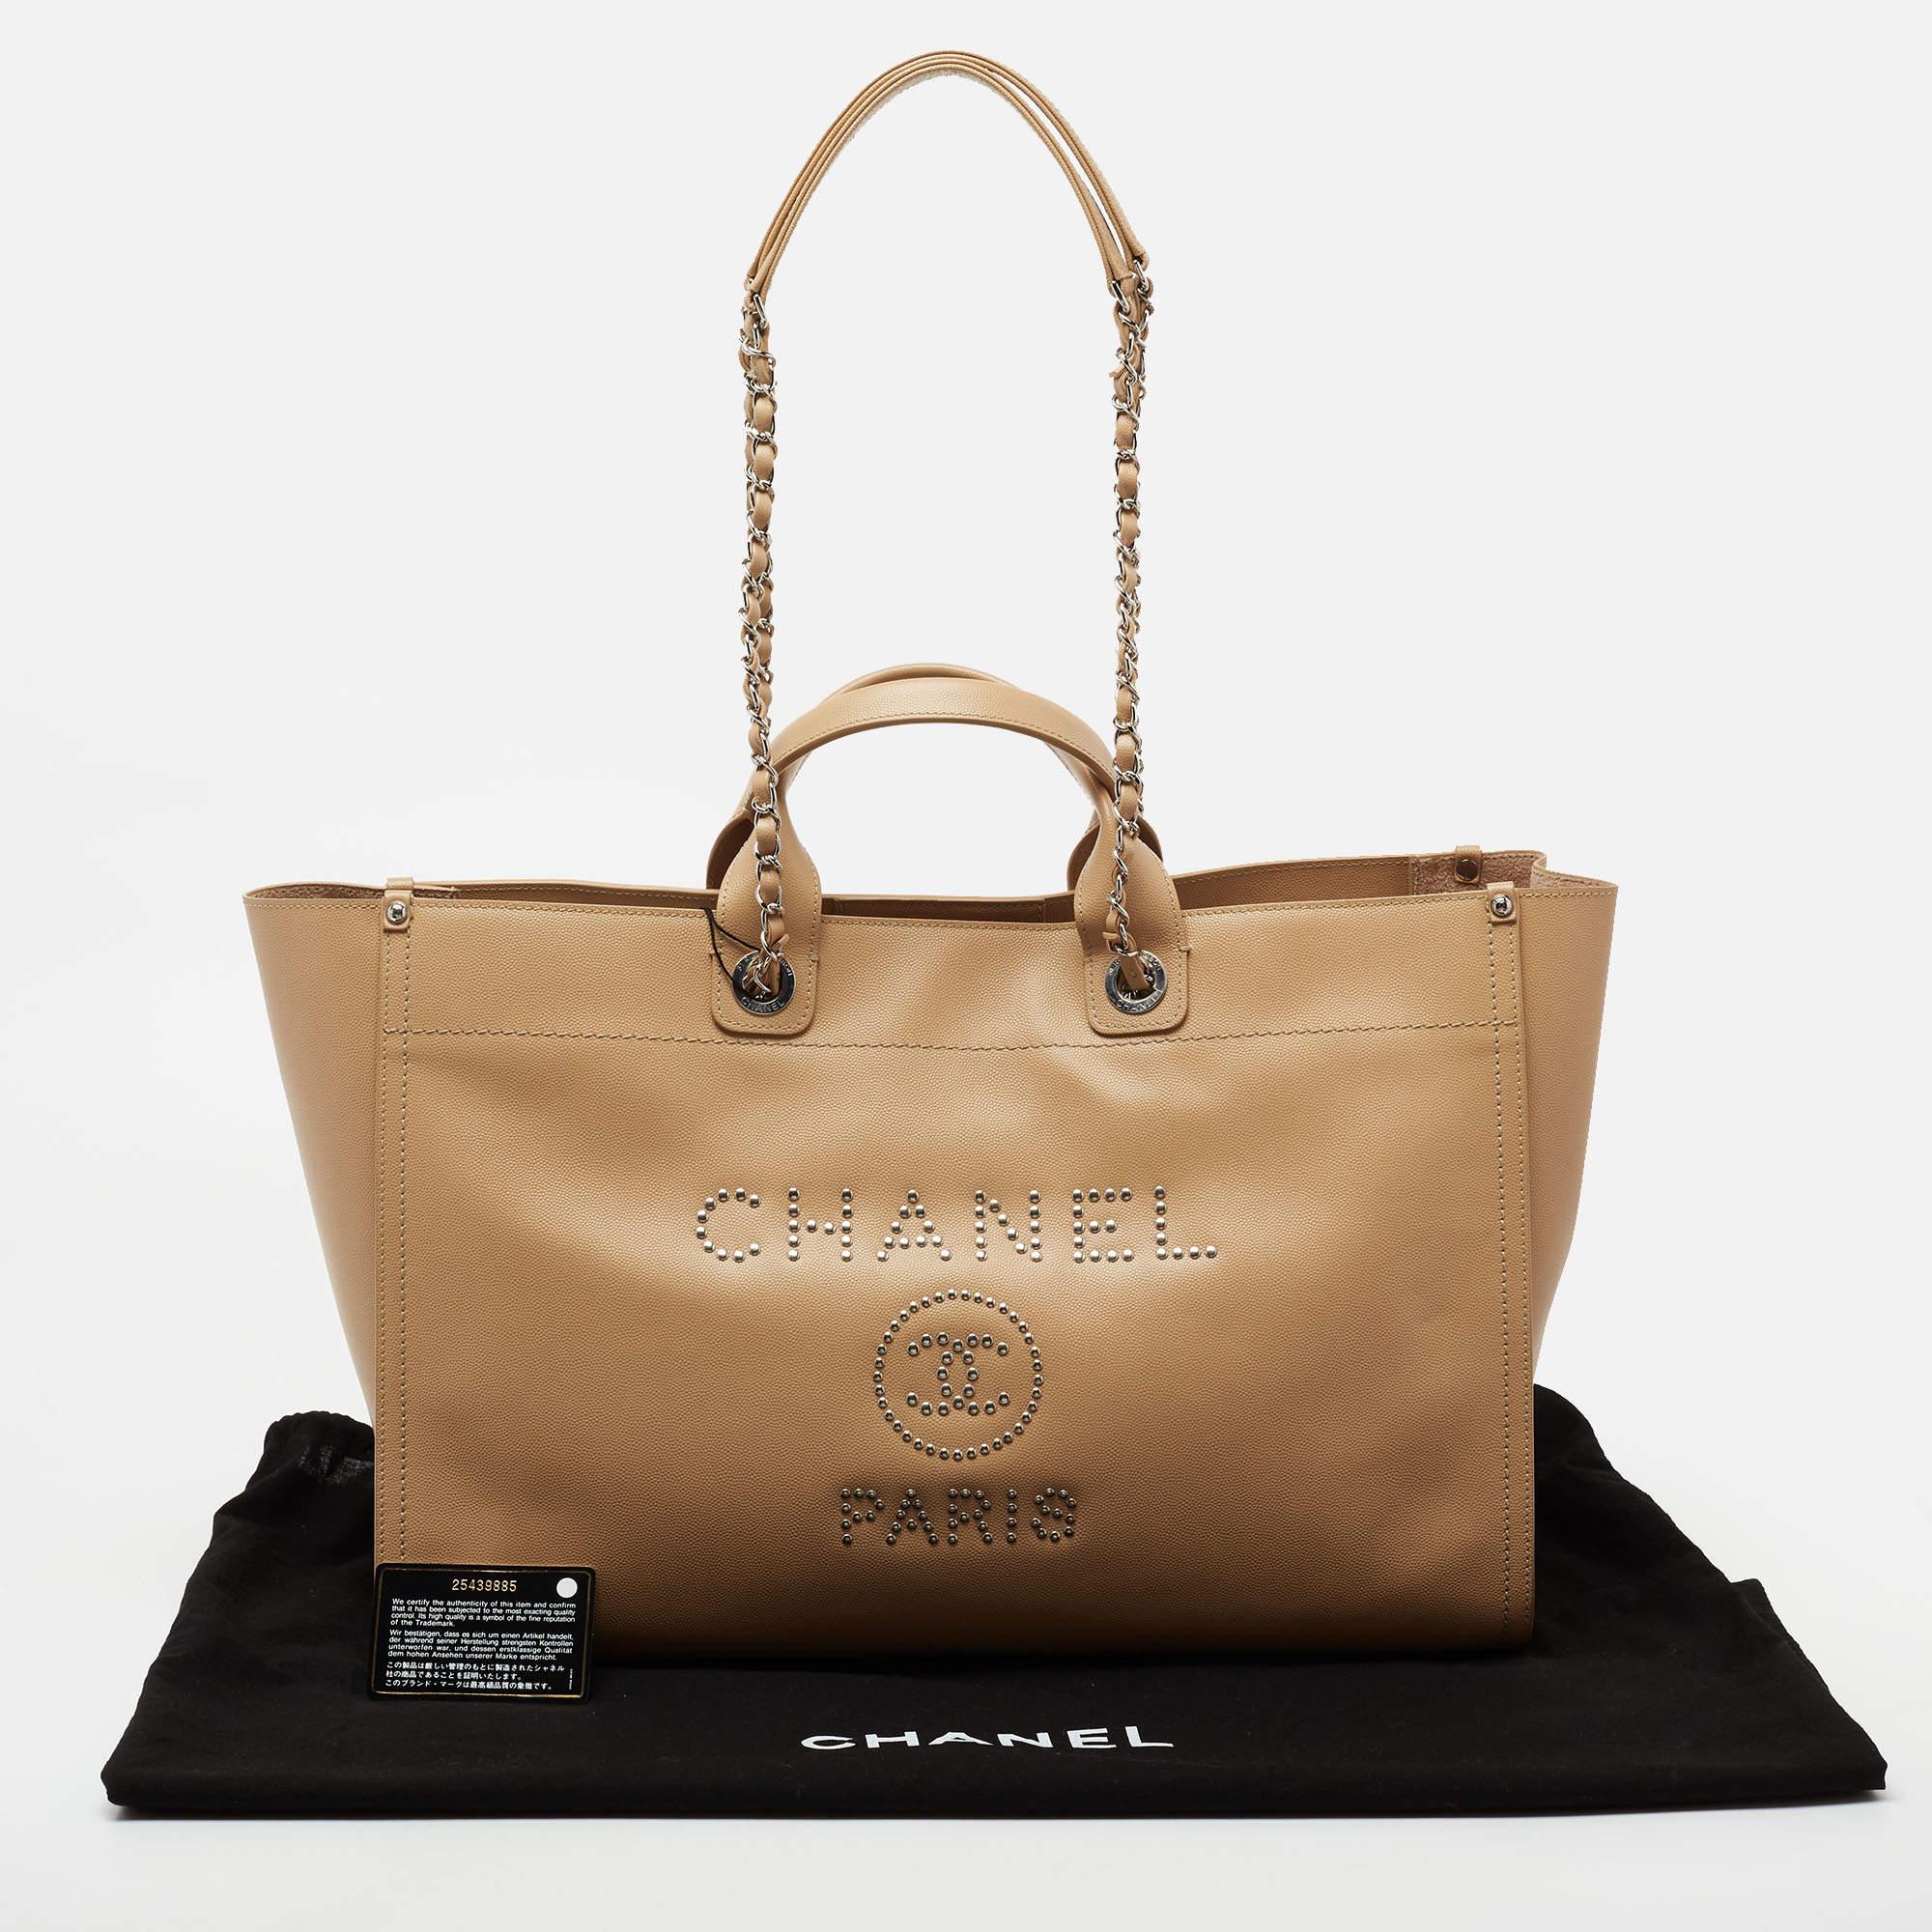 Chanel Beige Leather Large Studded Deauville Tote 2